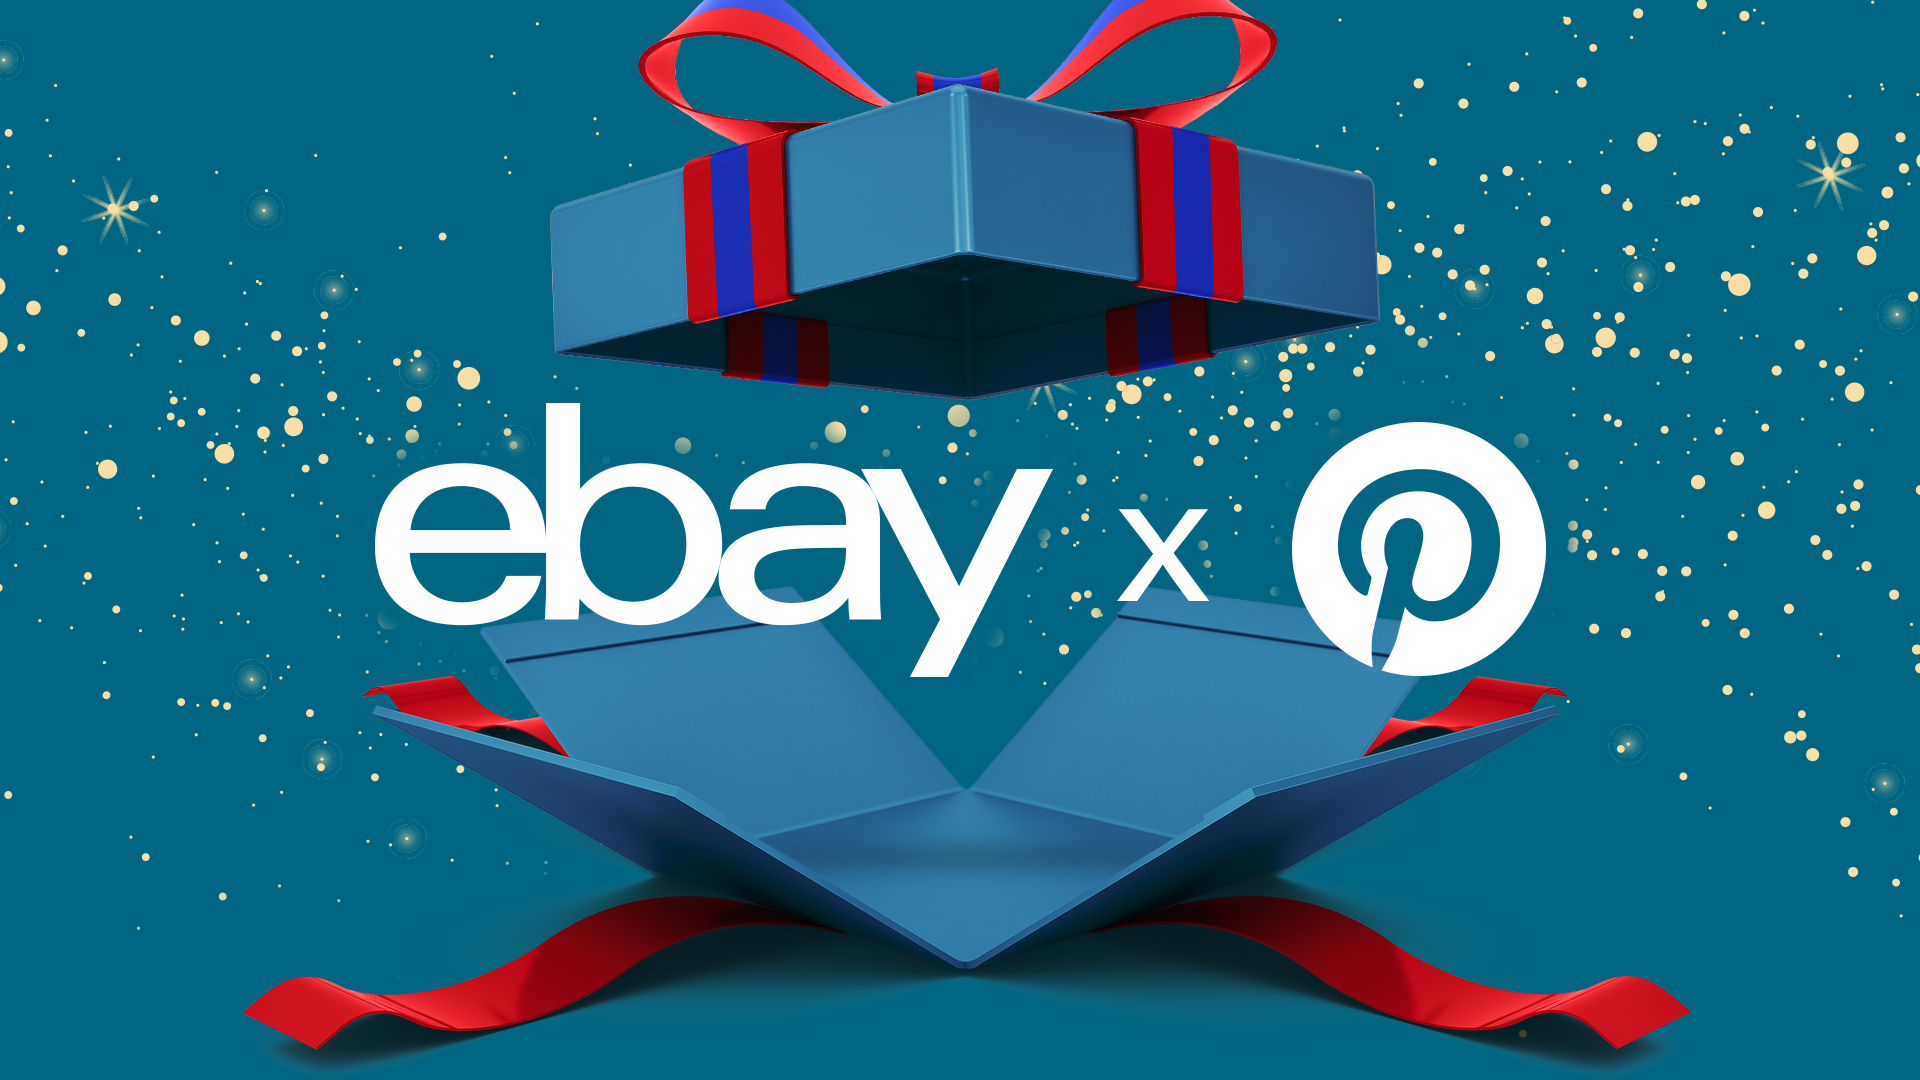 eBay’s More the Merrier Gift Board Launches the First-Of-Its-Kind Holiday Wishlist Sweepstakes on Pinterest